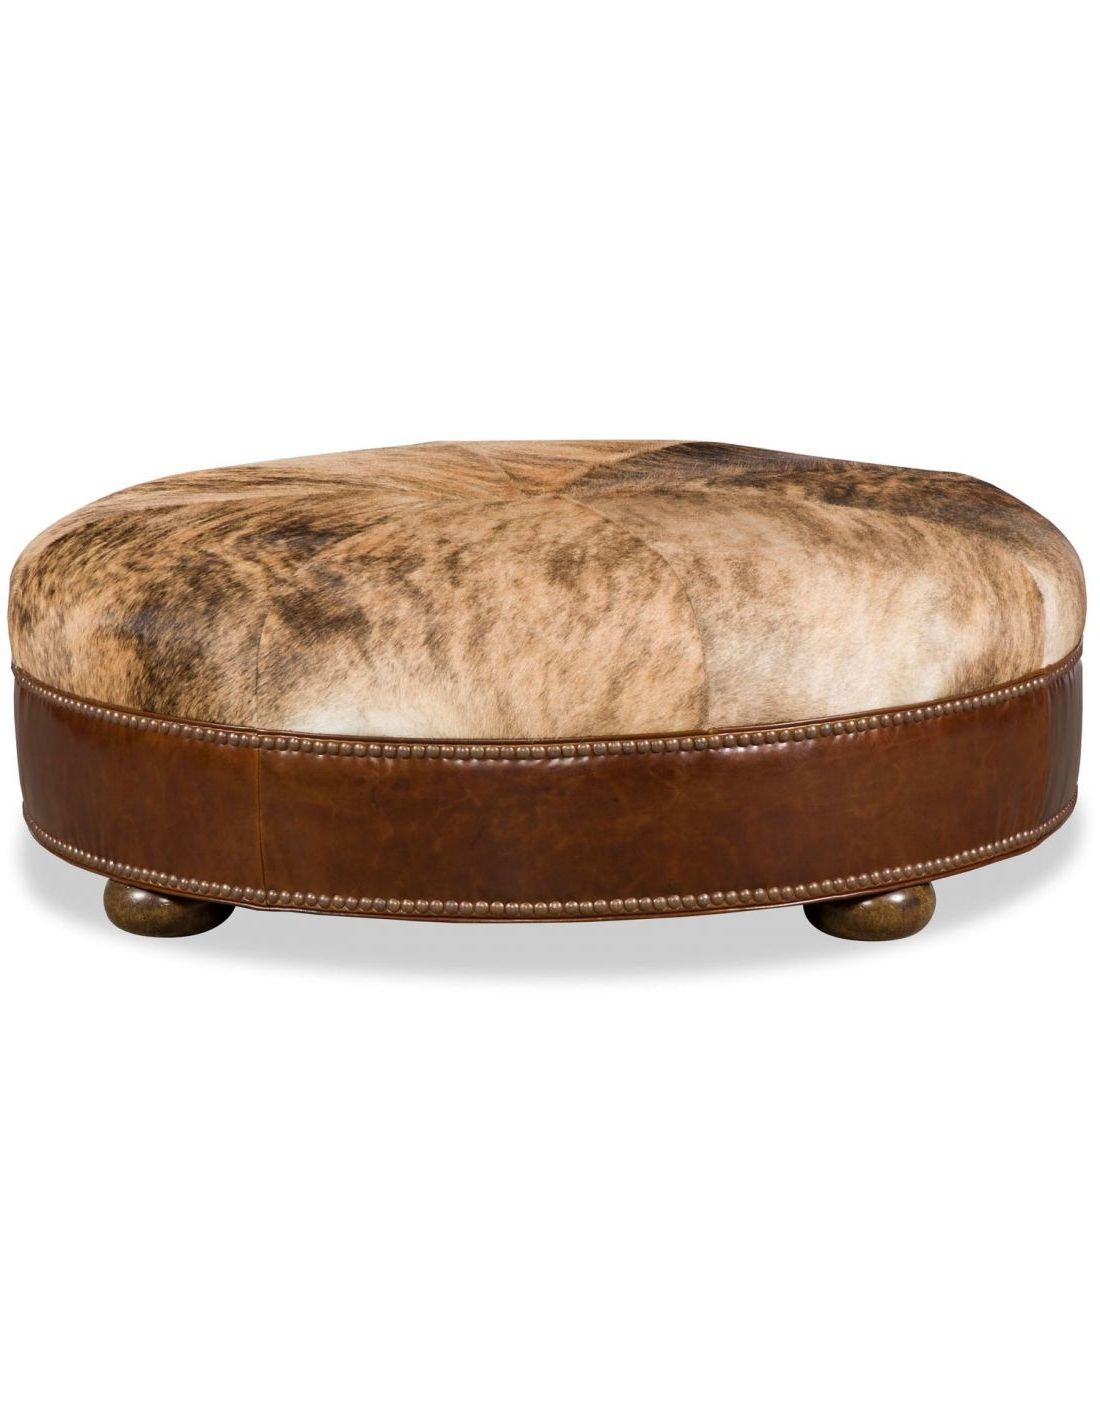 Famous Fabric Upholstered Ottomans With Regard To Round Ottoman Stool Leather & Fabric Upholstered (View 8 of 15)